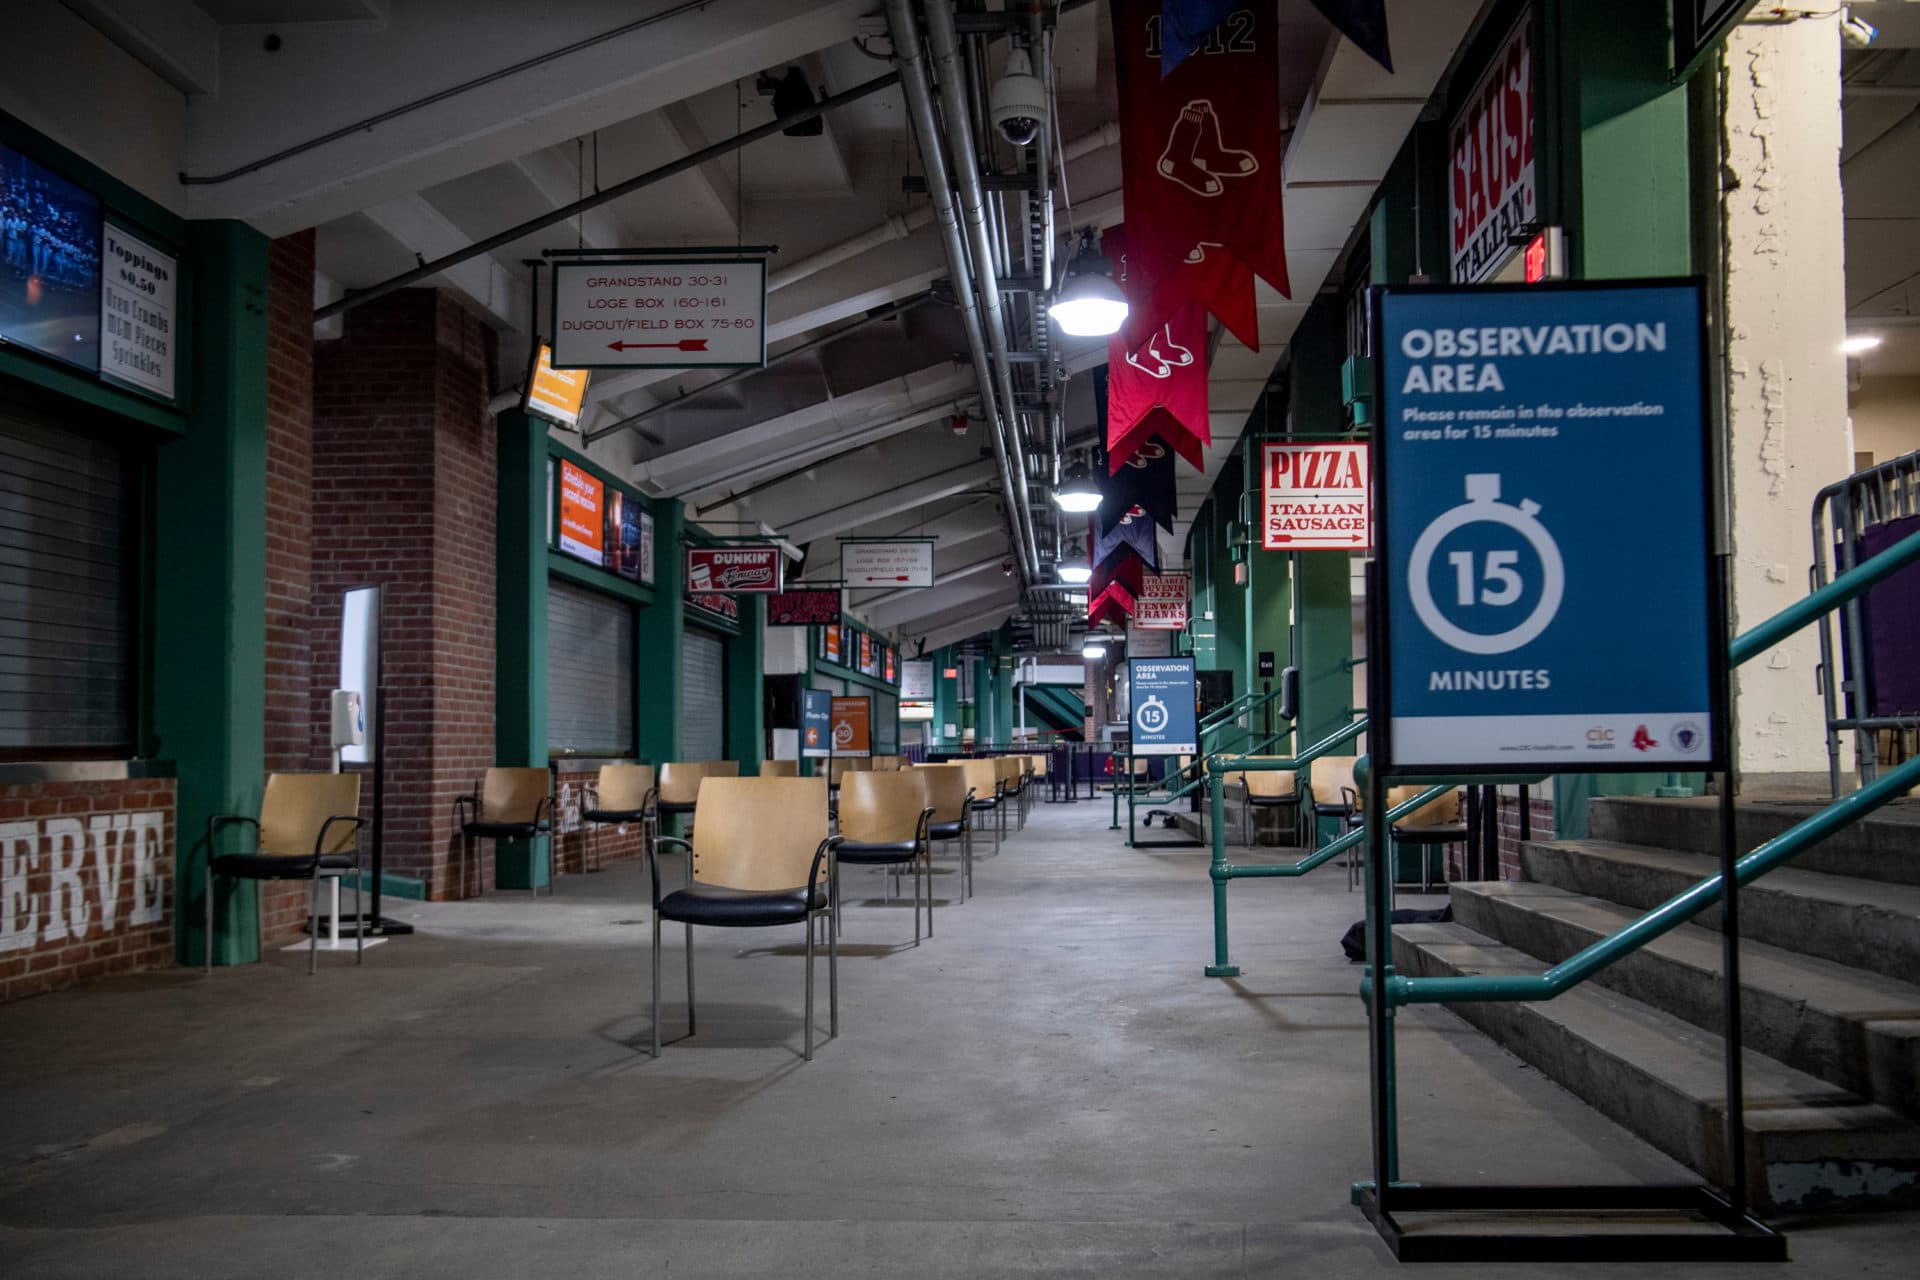 The concourse undergoes preparations to serve as a COVID-19 vaccination site at Fenway Park in Boston on Jan. 27. (Courtesy Maddie Malhotra/Boston Red Sox)